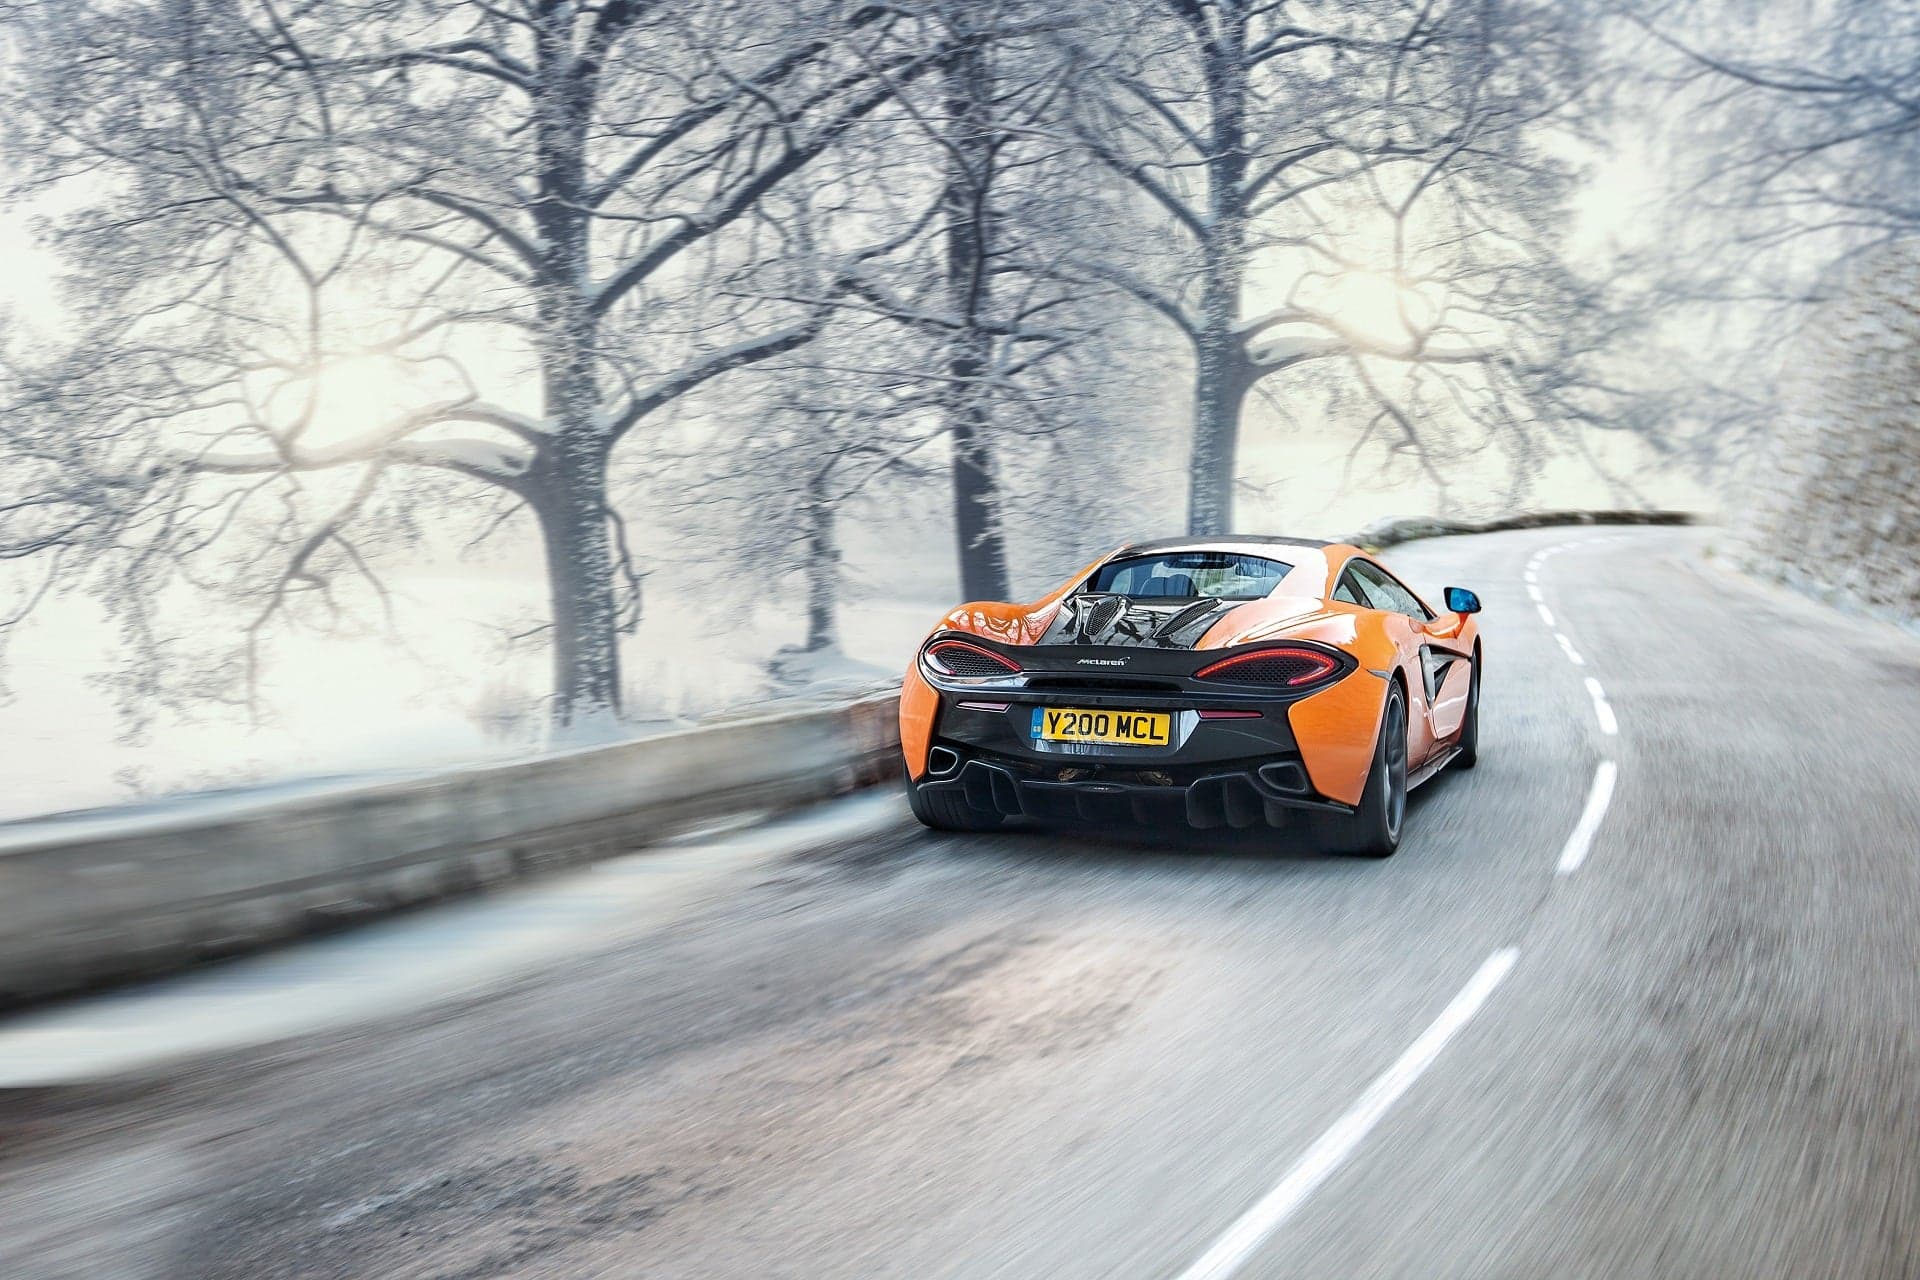 Yes, Drive Your McLaren in Snow with Pirelli Winter Tires